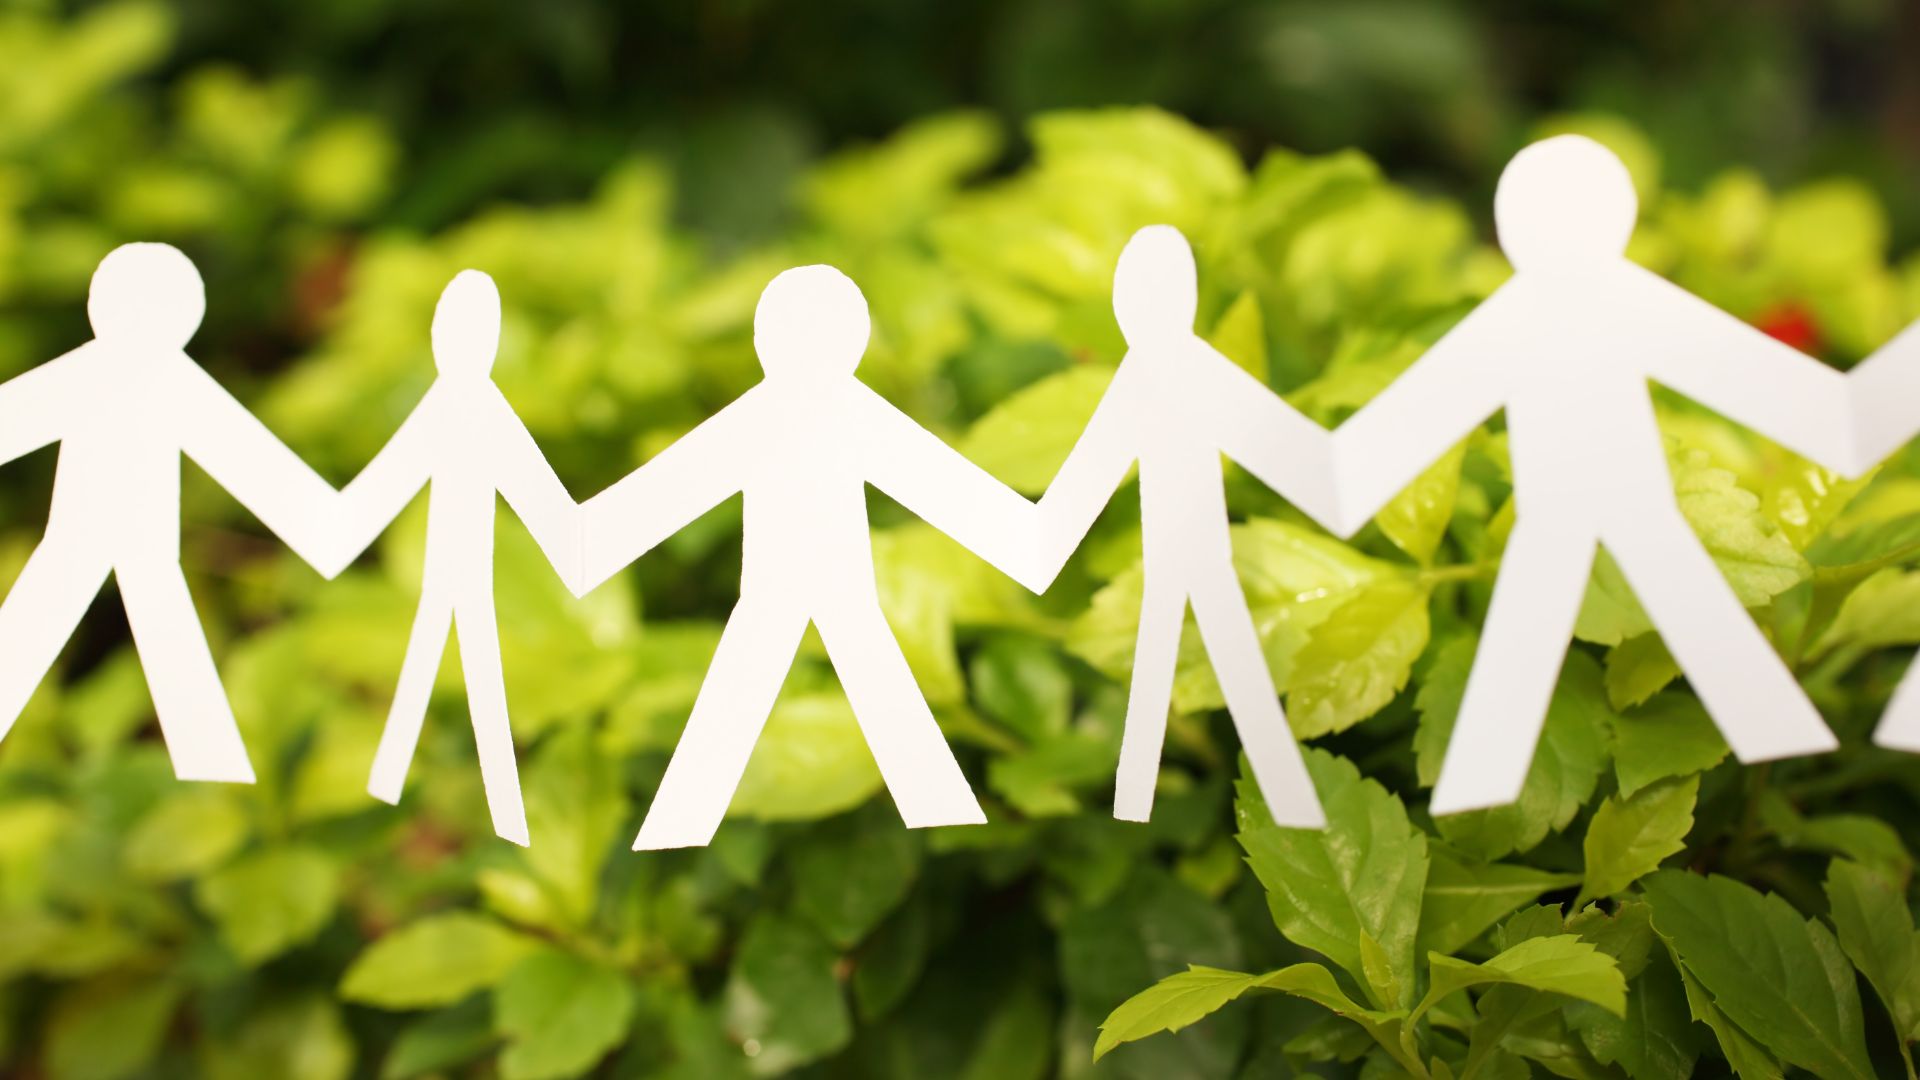 Paper cutout of people joining hands in front of a green leaf background.